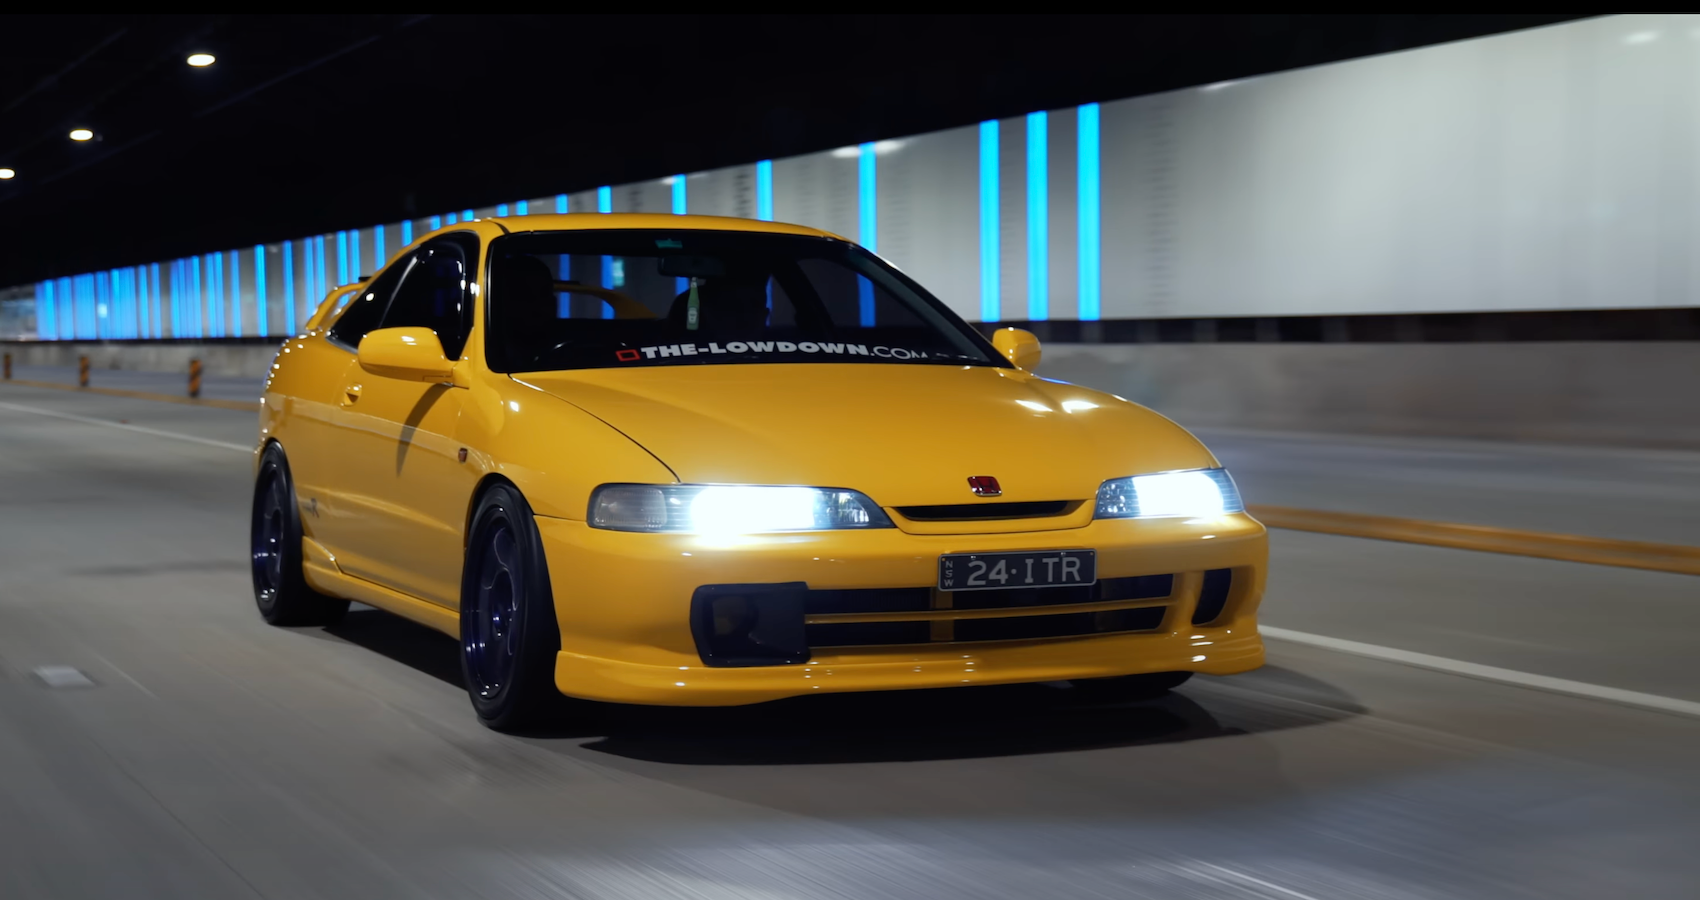 This Modified Honda Integra Type R: A Classic Example of Why 90s JDM Cars Remain Iconic